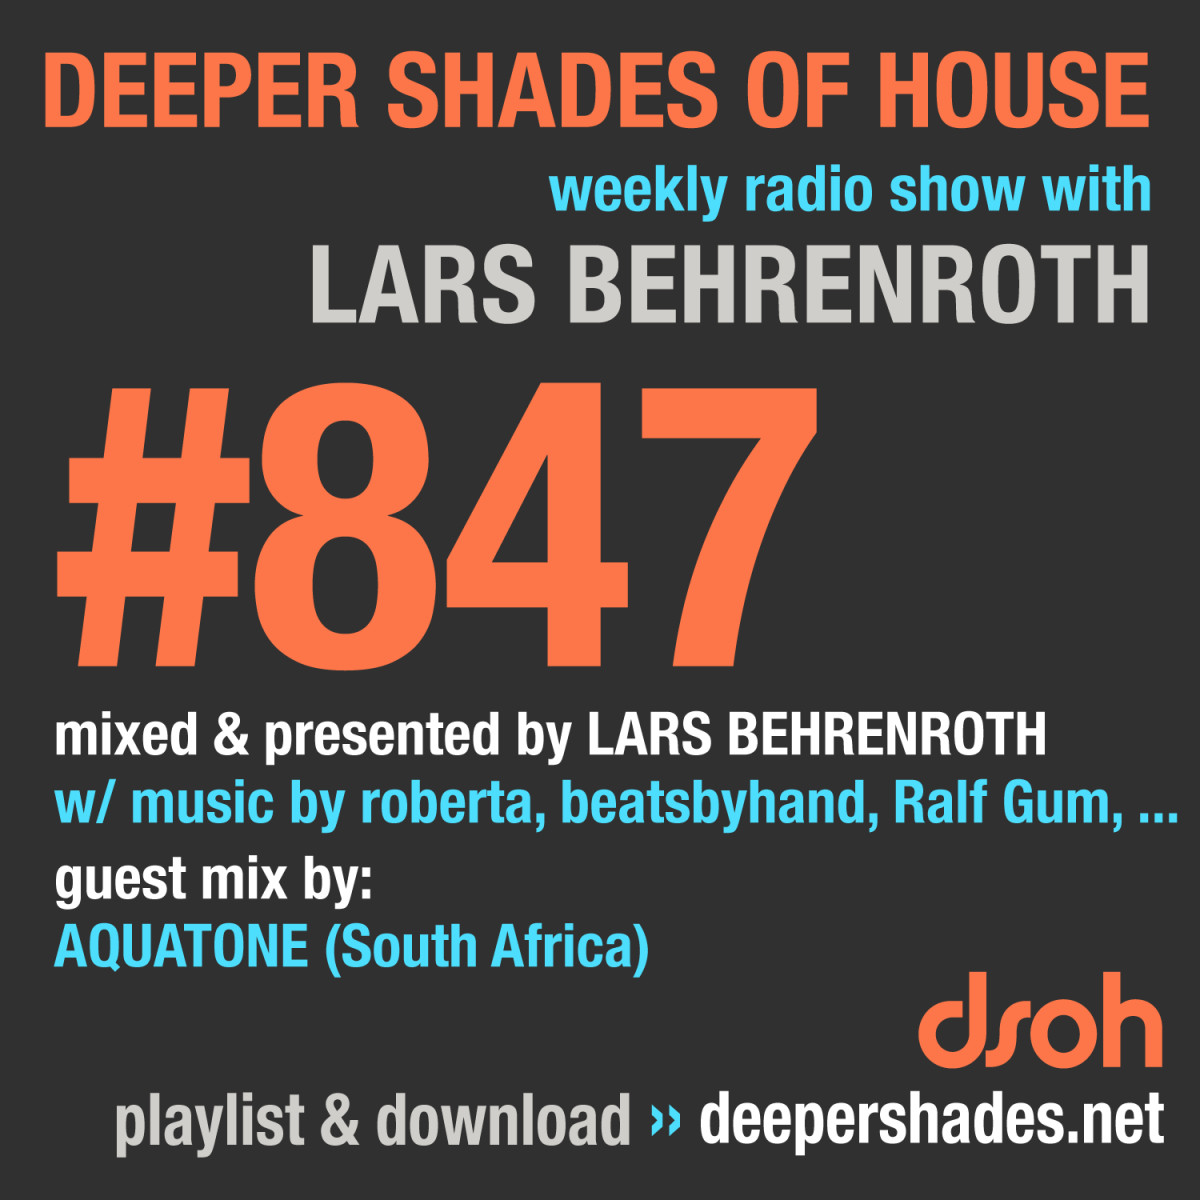 #nowplaying on radio.deepershades.net : Lars Behrenroth w/ exclusive guest mix by @AQUATONEdub (South Africa) - DSOH 847 Deeper Shades Of House #deephouse #livestream #dsoh #housemusic